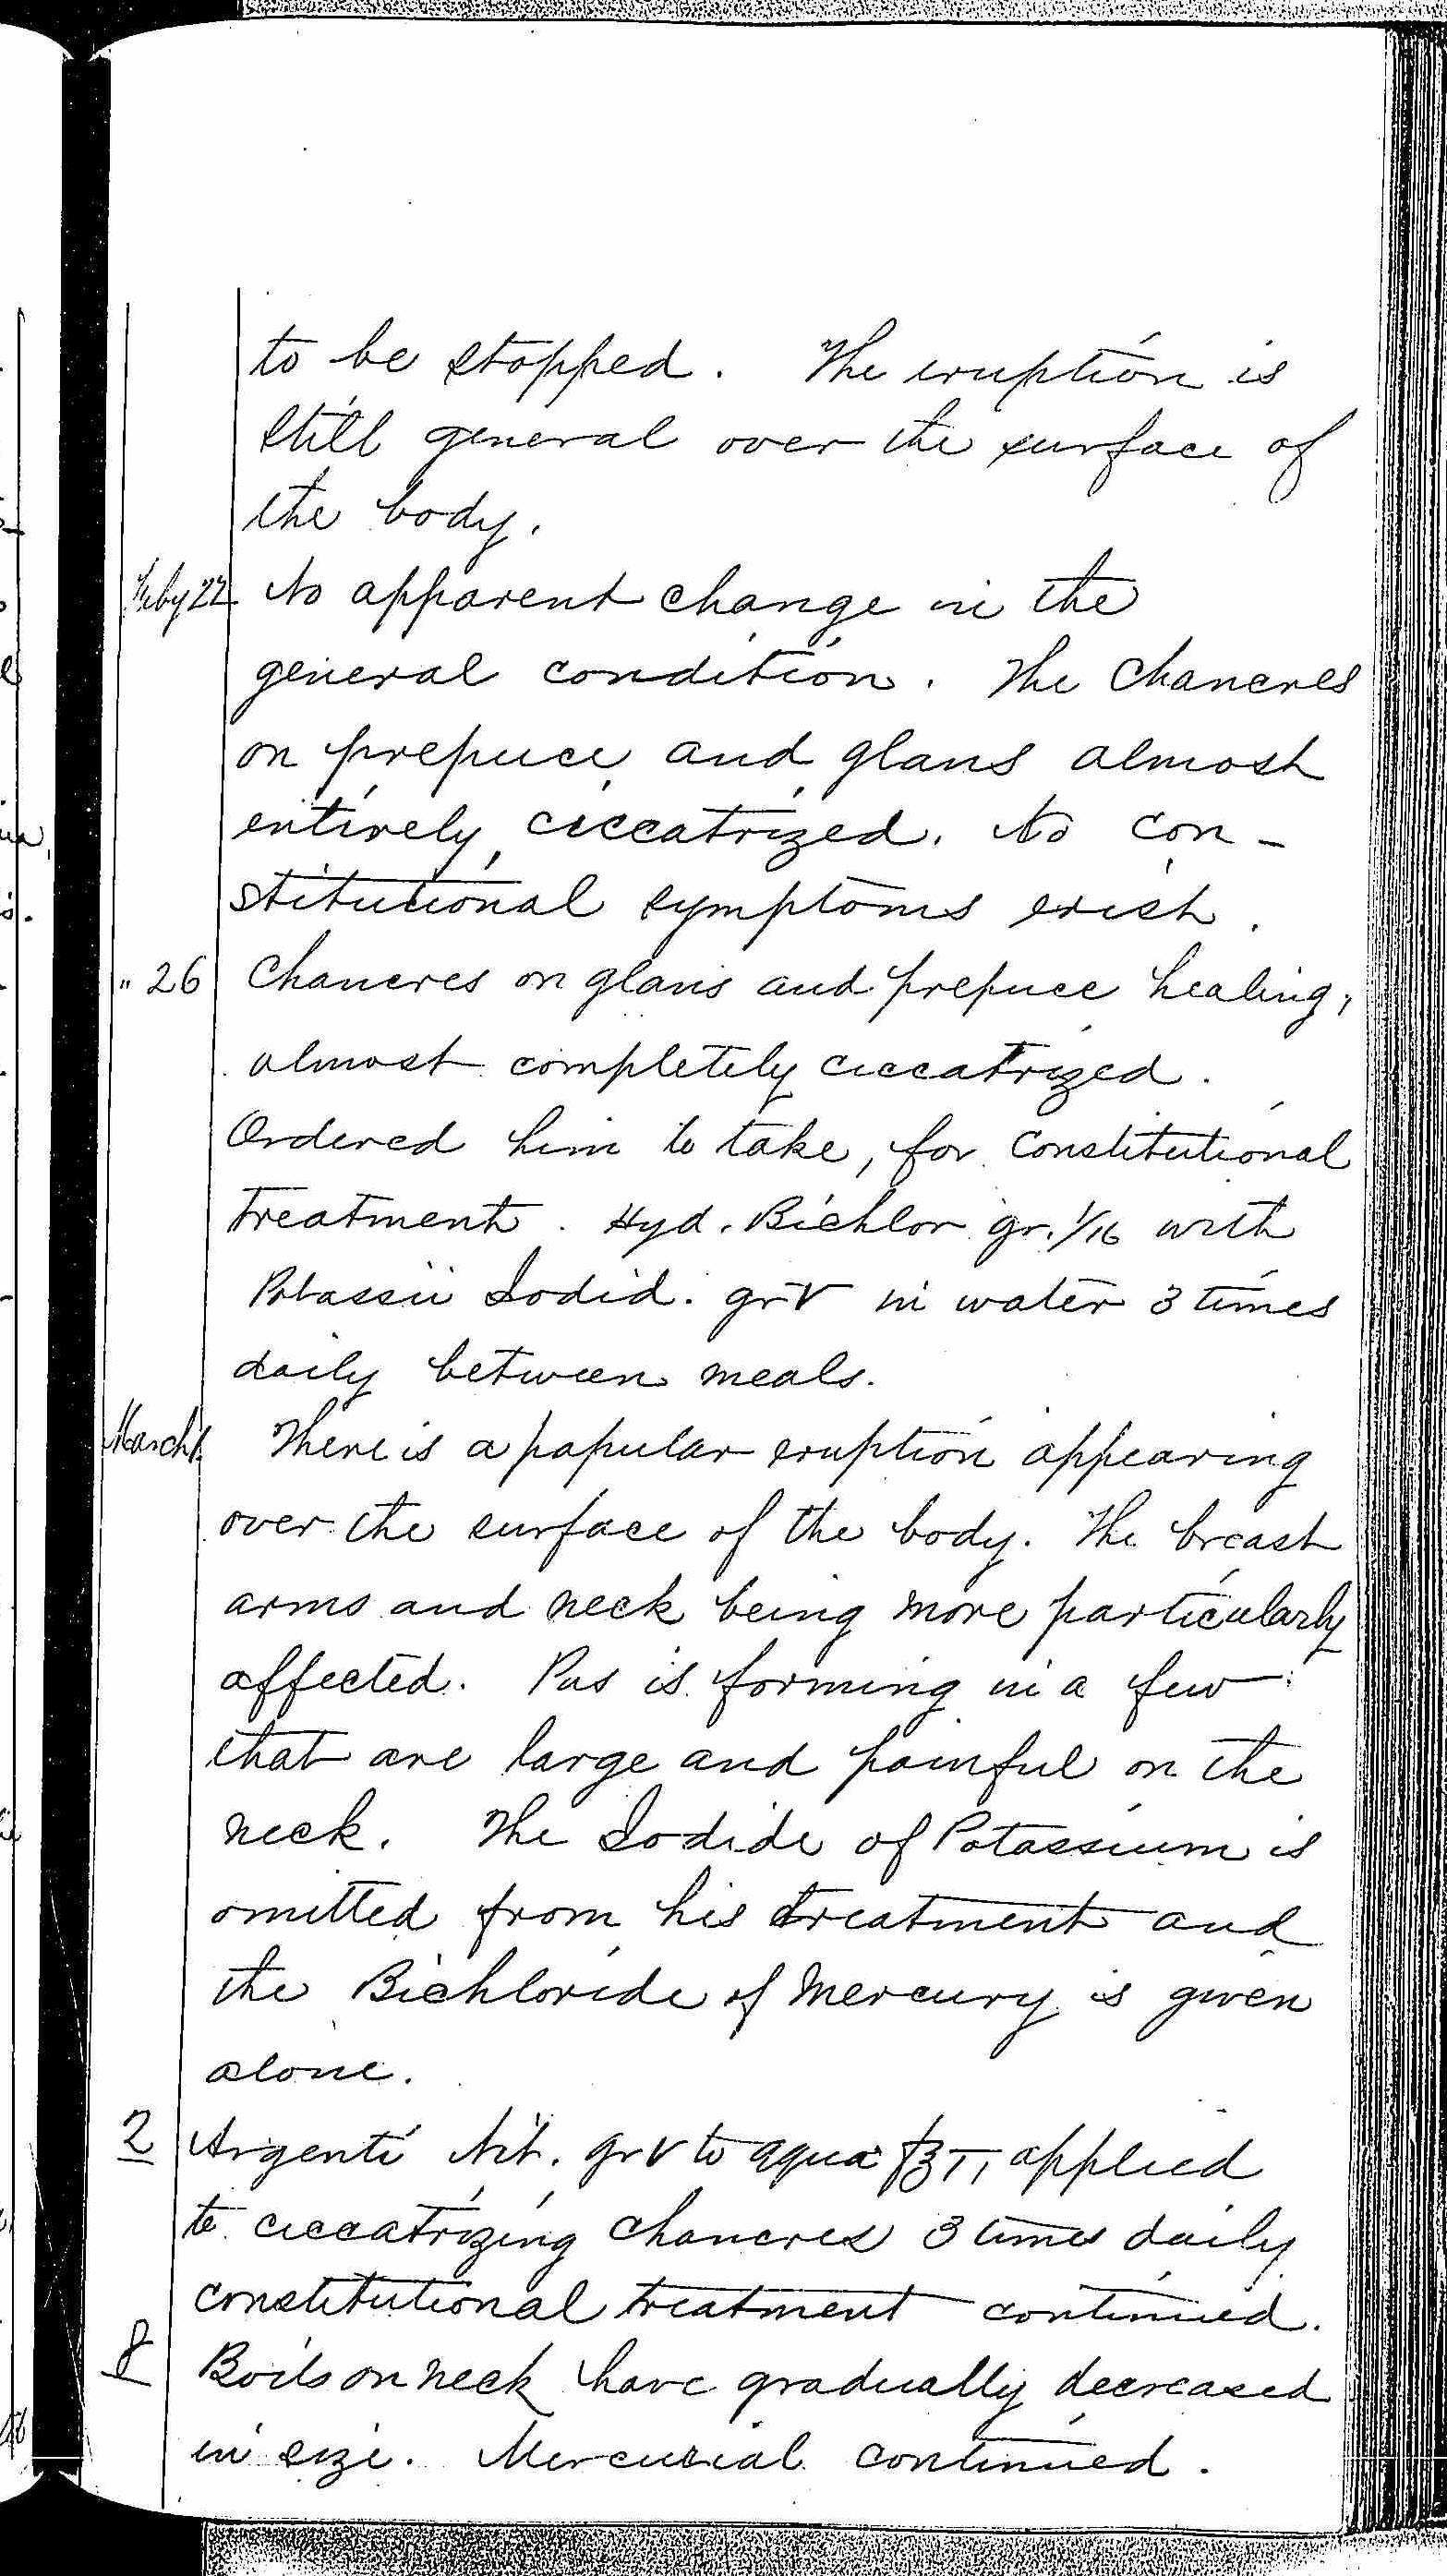 Entry for John Archer (page 3 of 5) in the log Hospital Tickets and Case Papers - Naval Hospital - Washington, D.C. - 1868-69